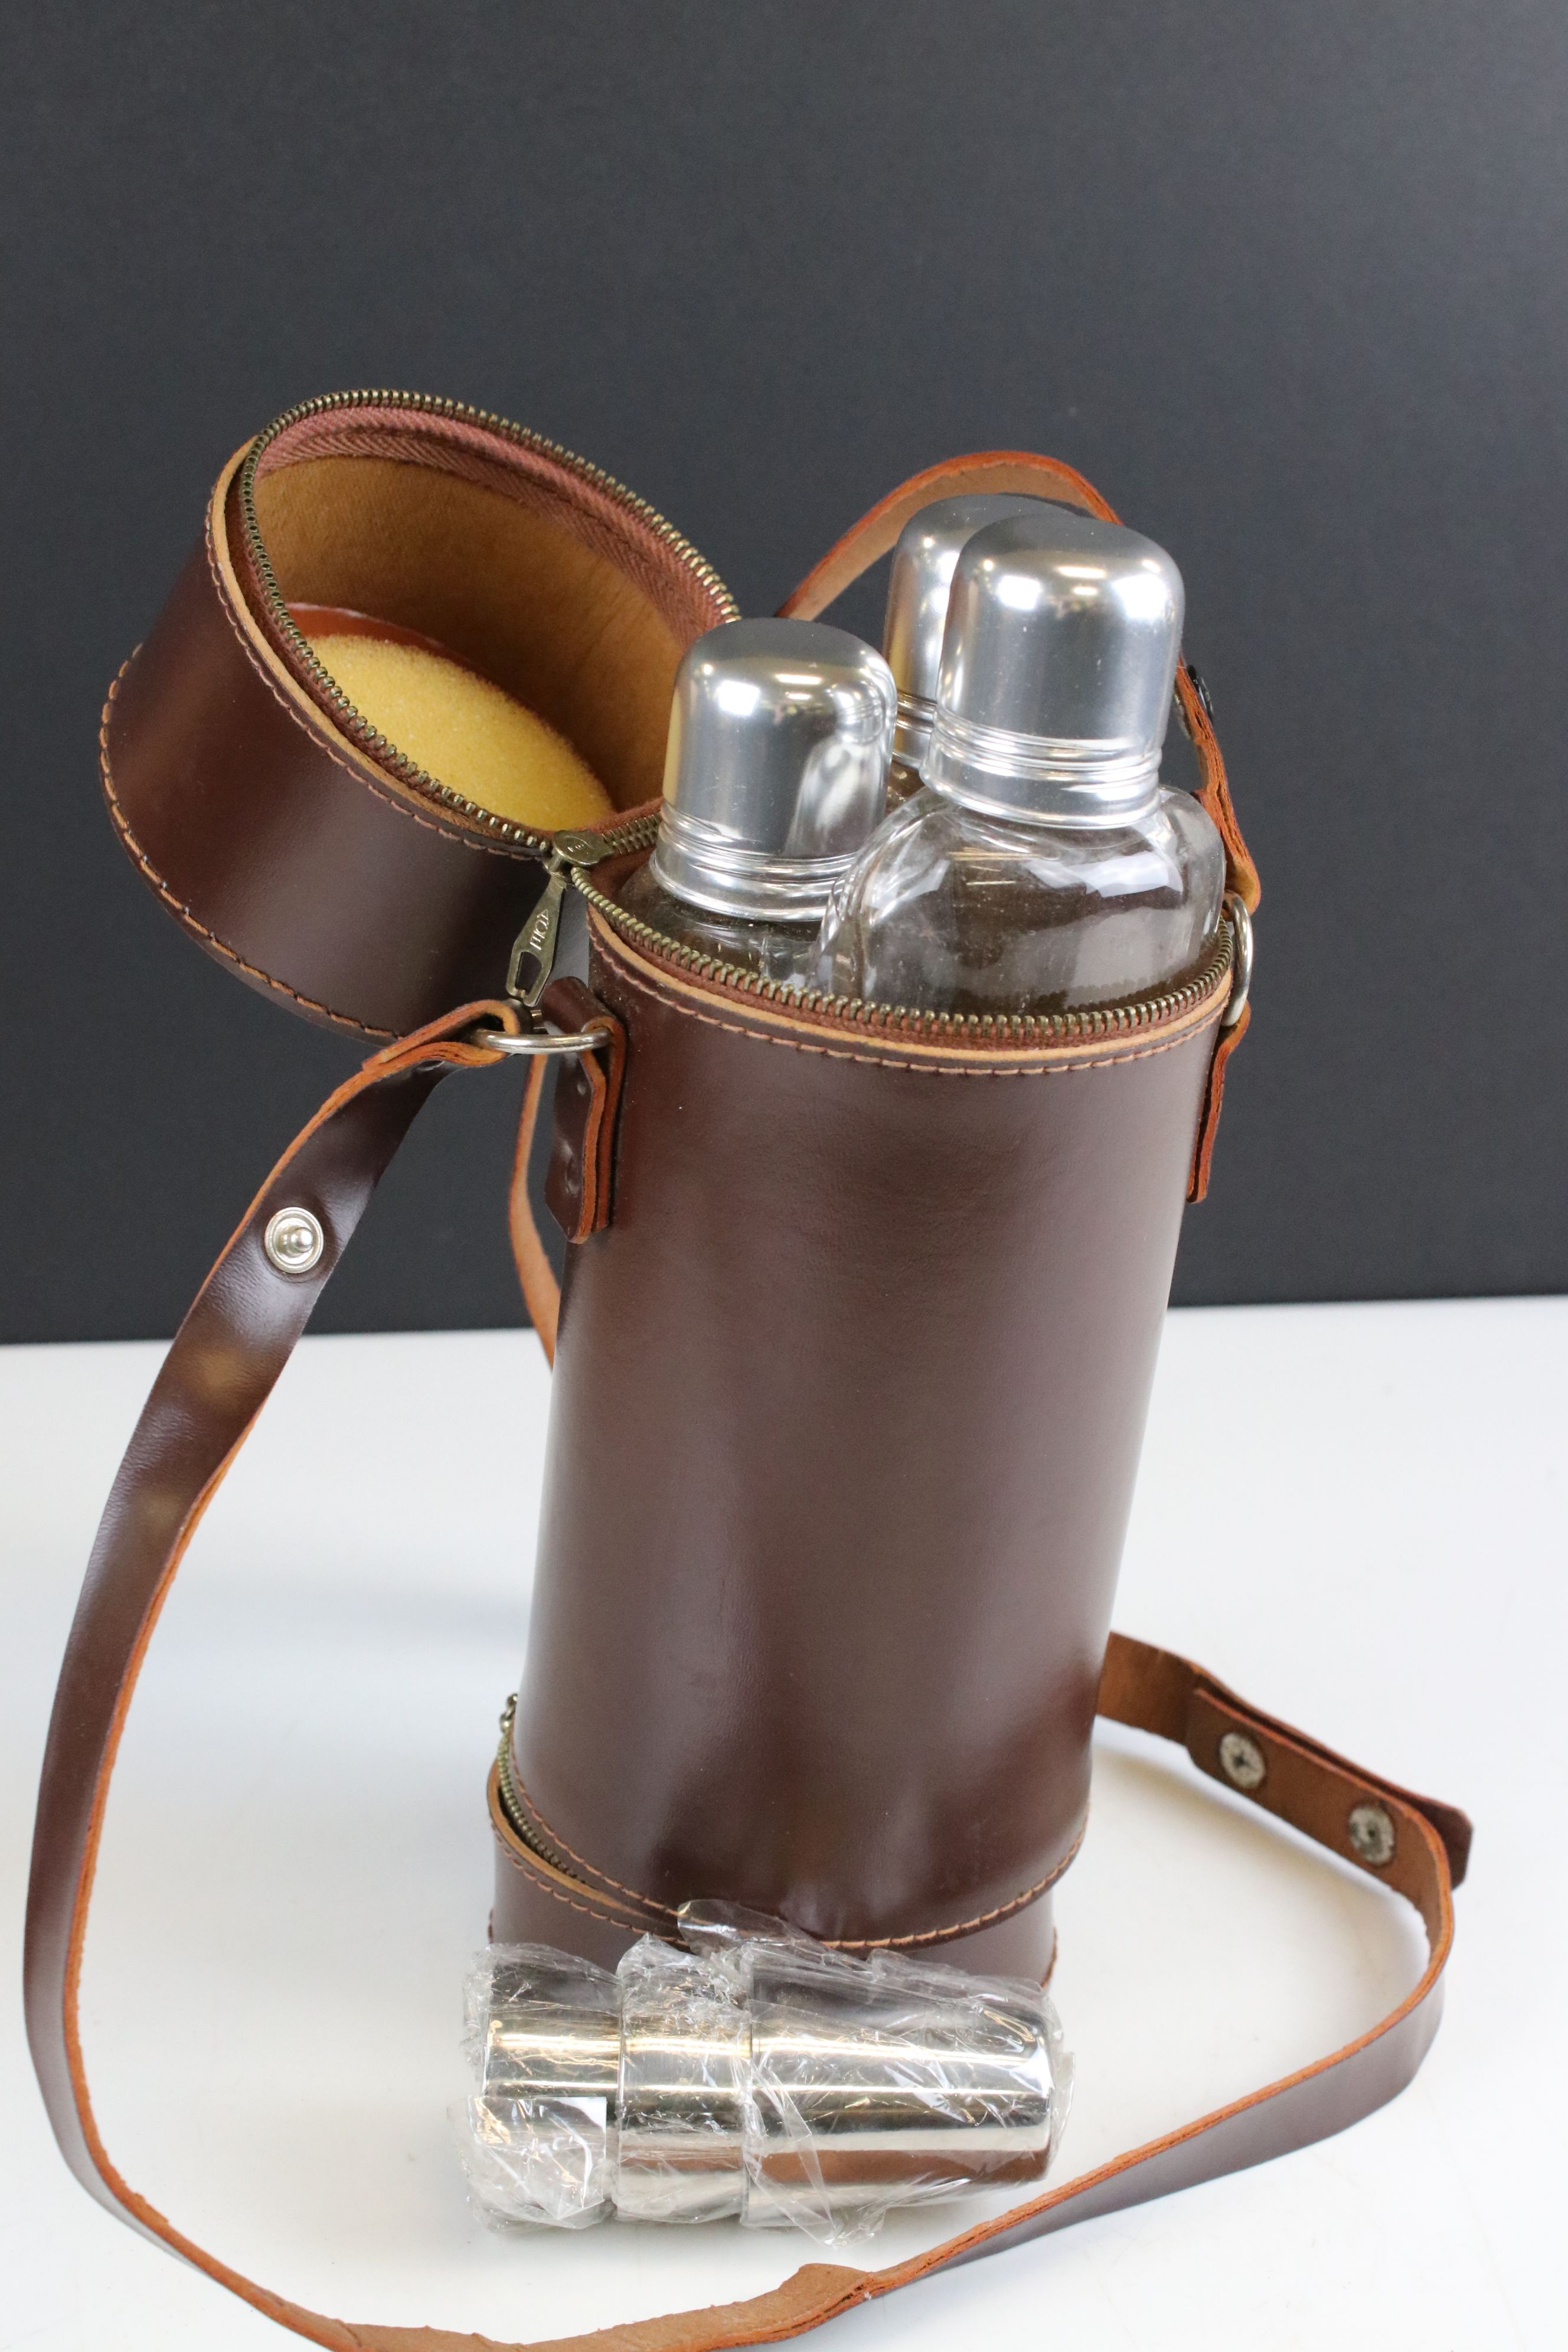 Leather cased triple spirit flask, set with three cups in separate compartments